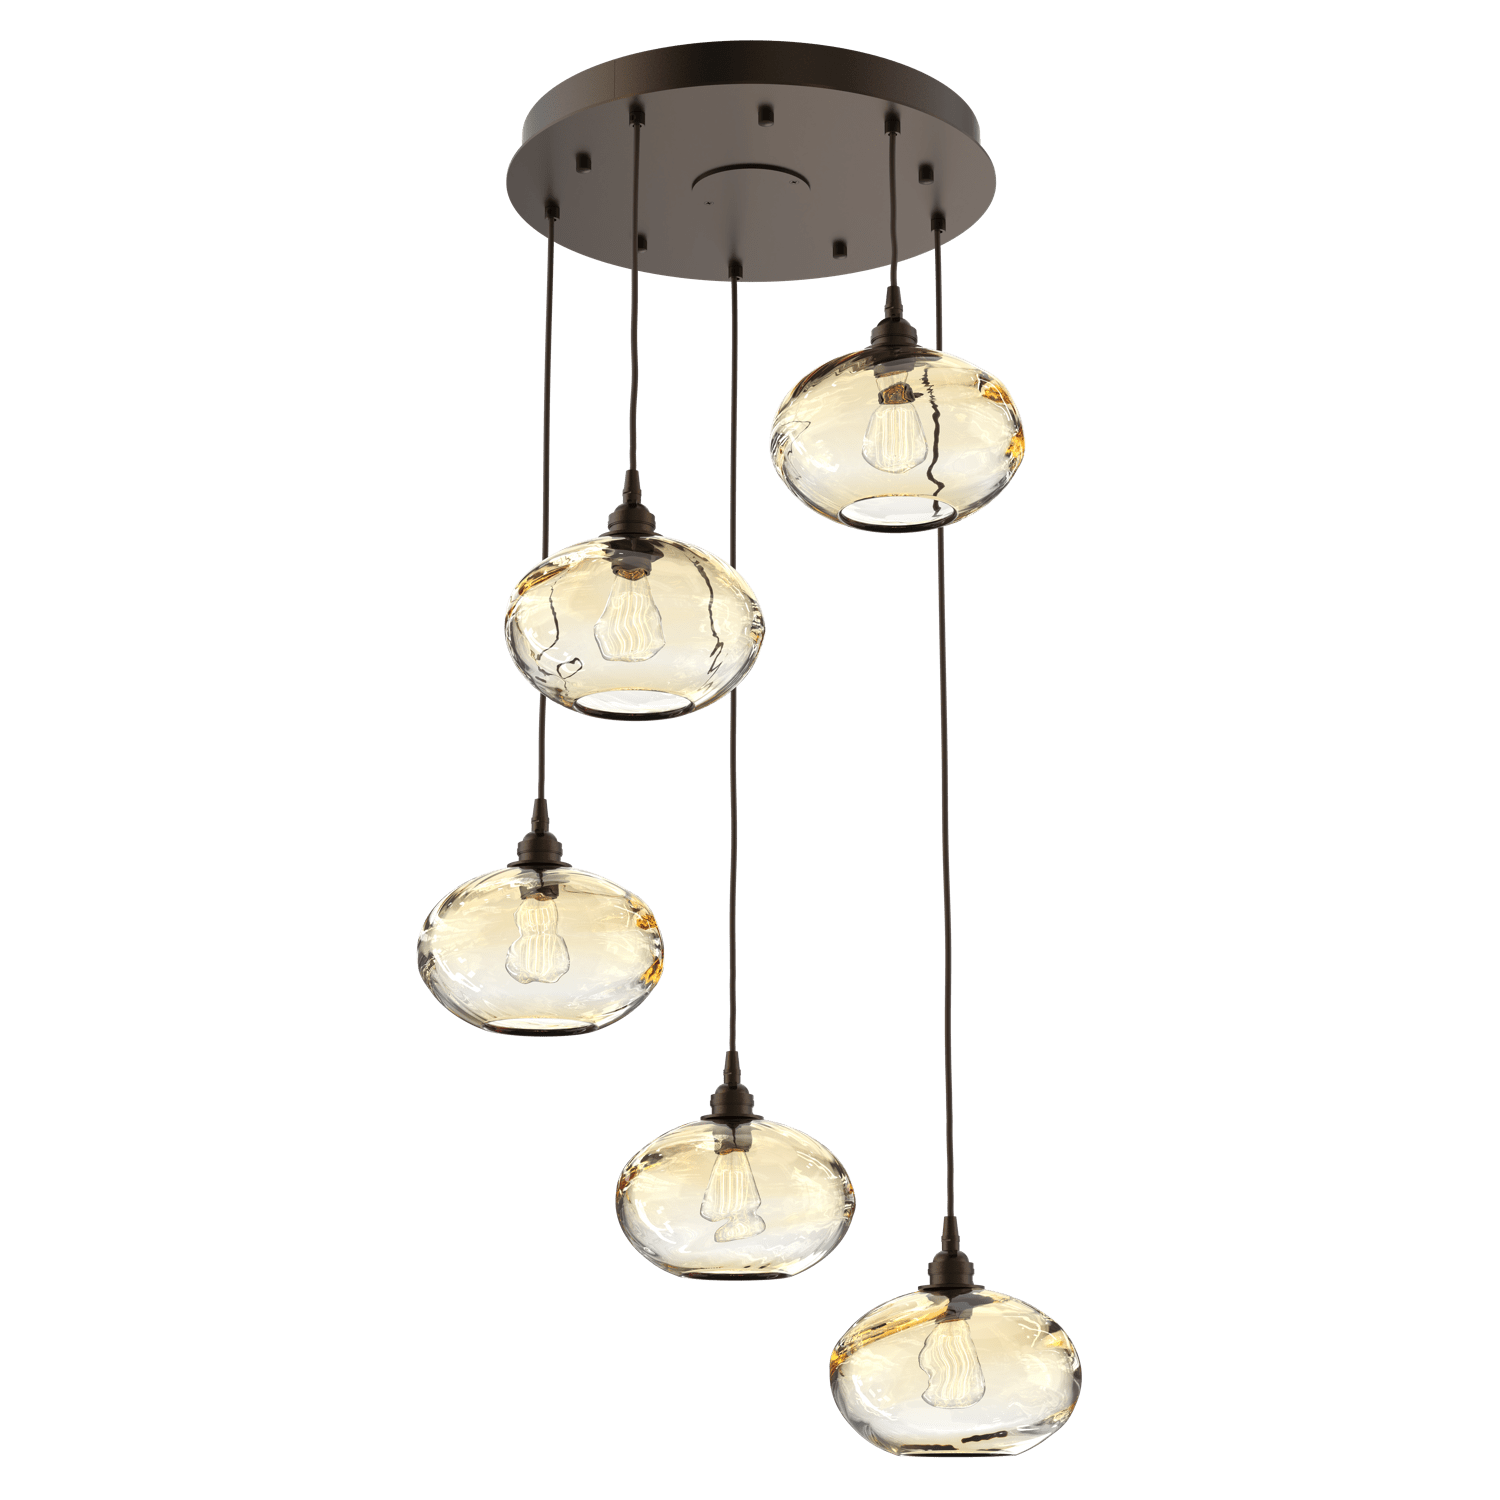 CHB0036-05-FB-OA-Hammerton-Studio-Optic-Blown-Glass-Coppa-5-light-round-pendant-chandelier-with-flat-bronze-finish-and-optic-amber-blown-glass-shades-and-incandescent-lamping